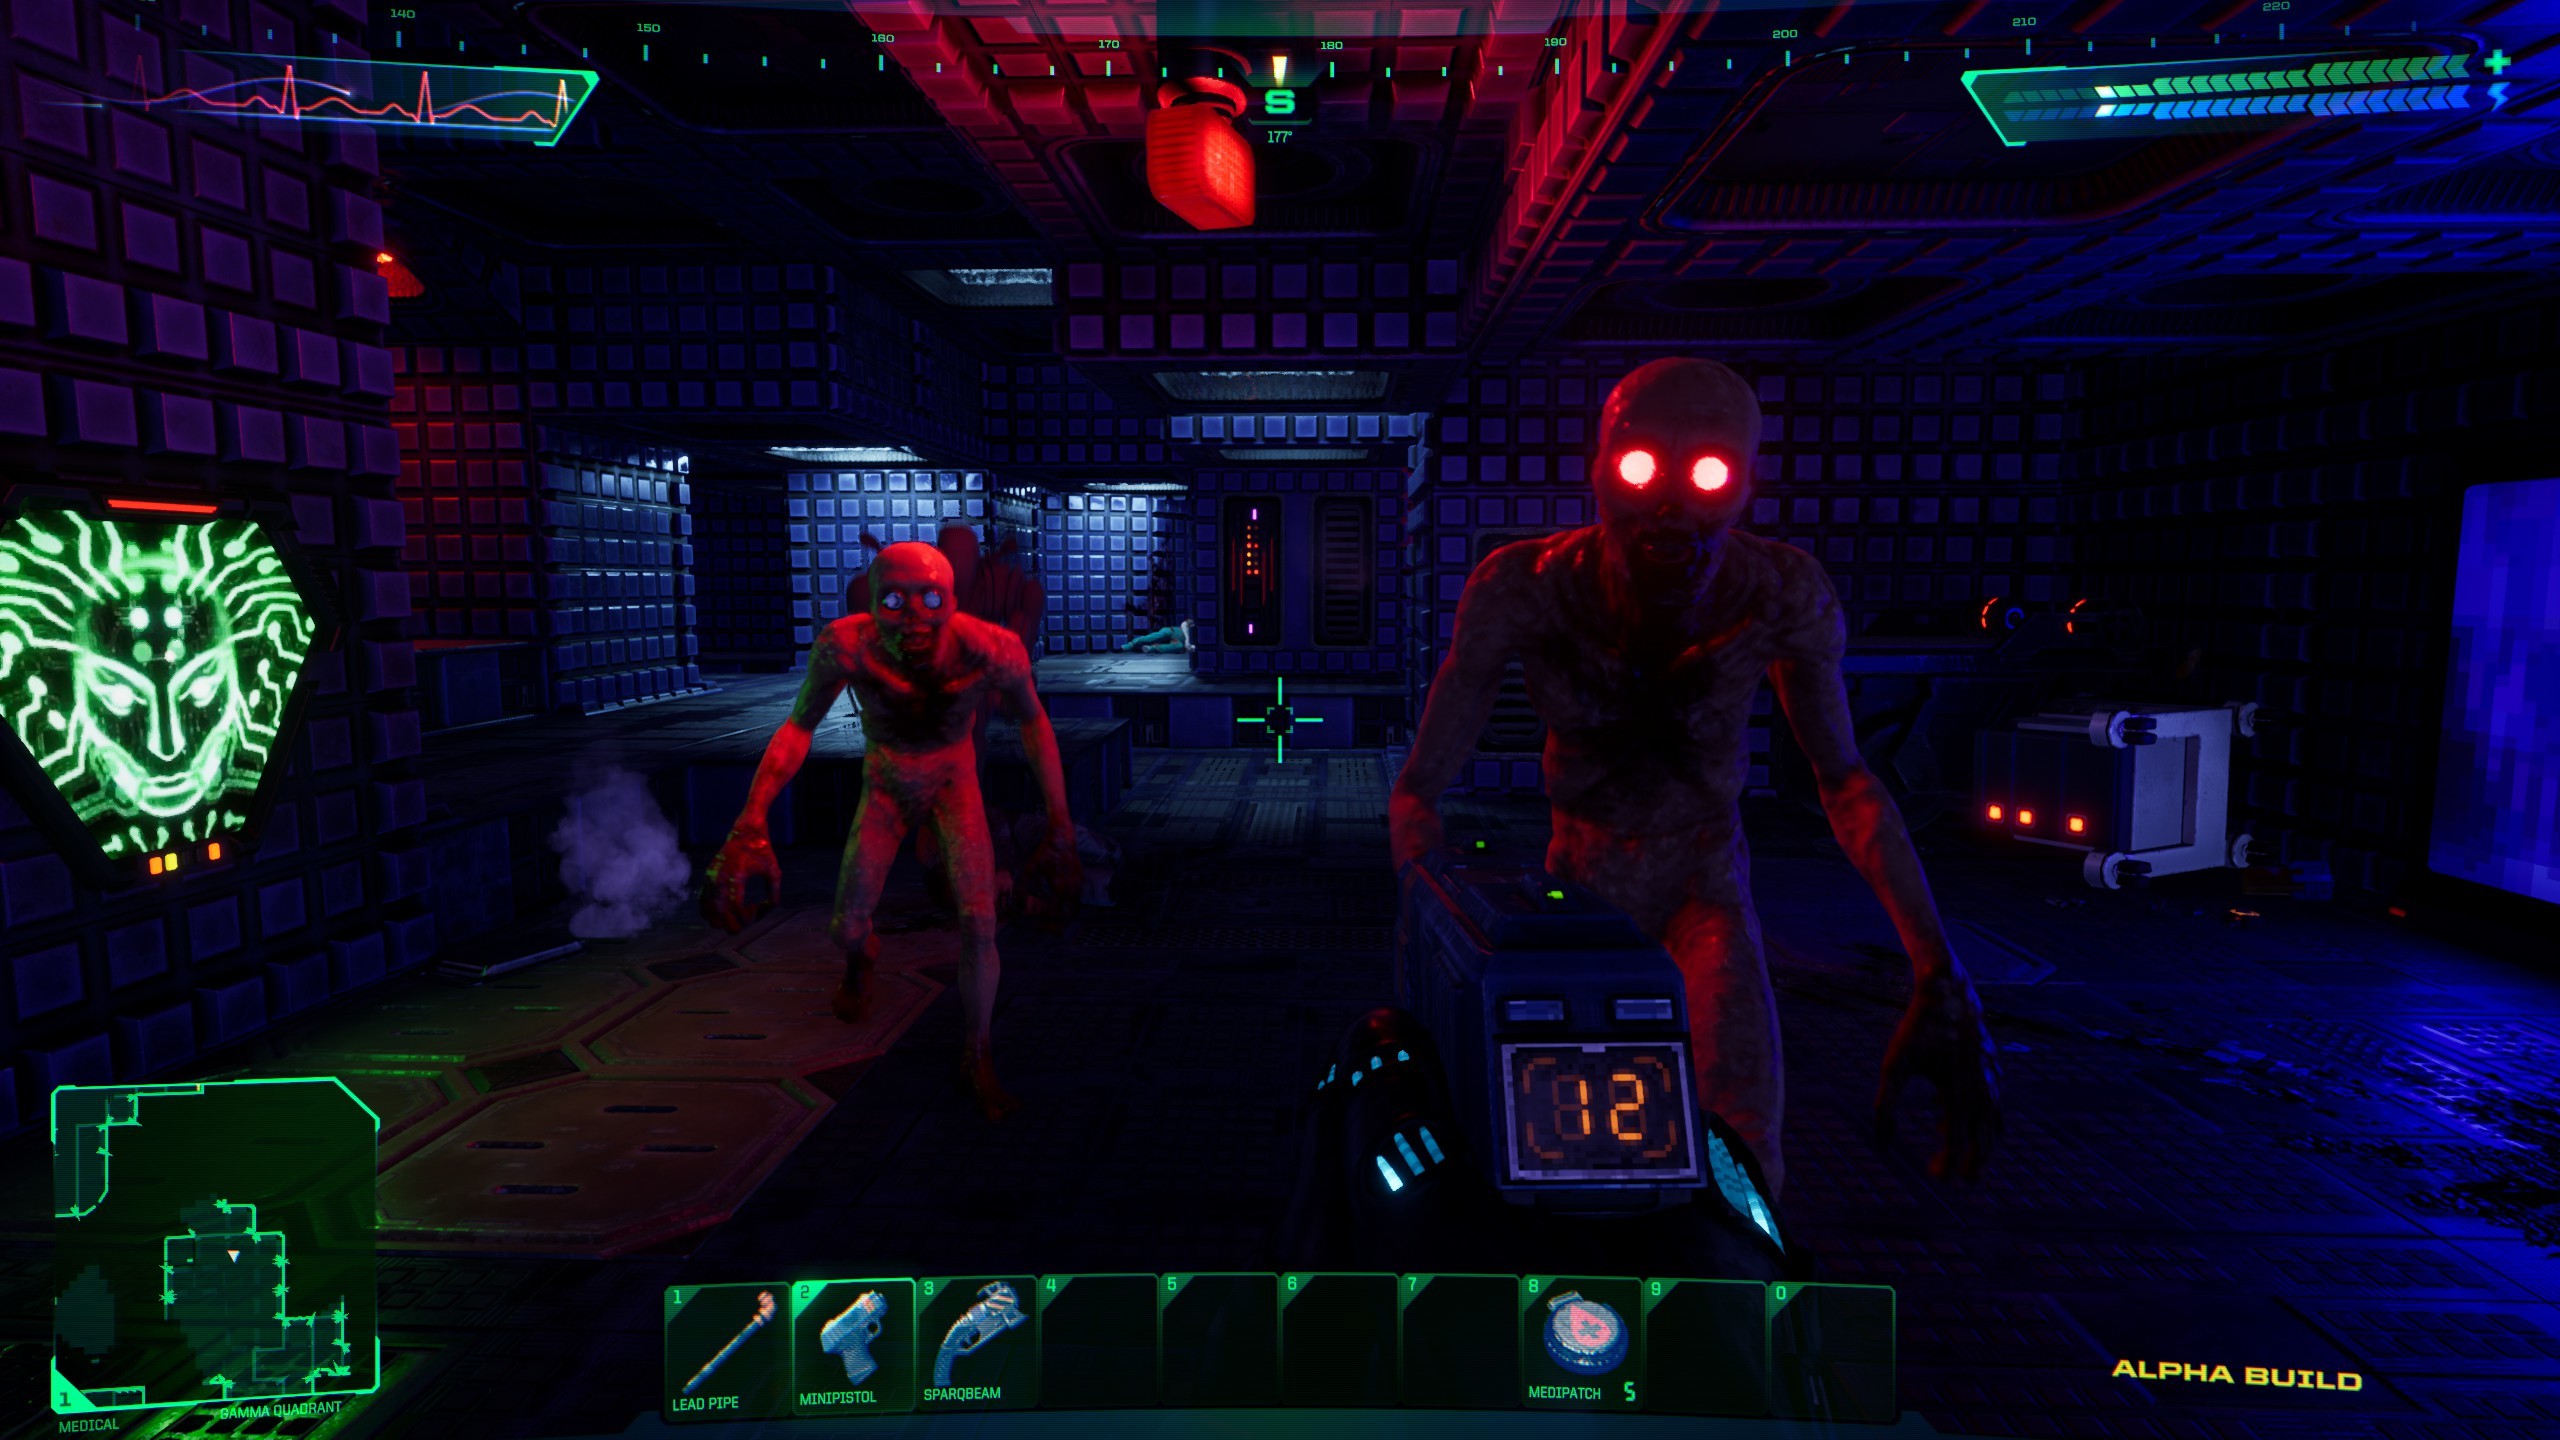 when is system shock remake being released?